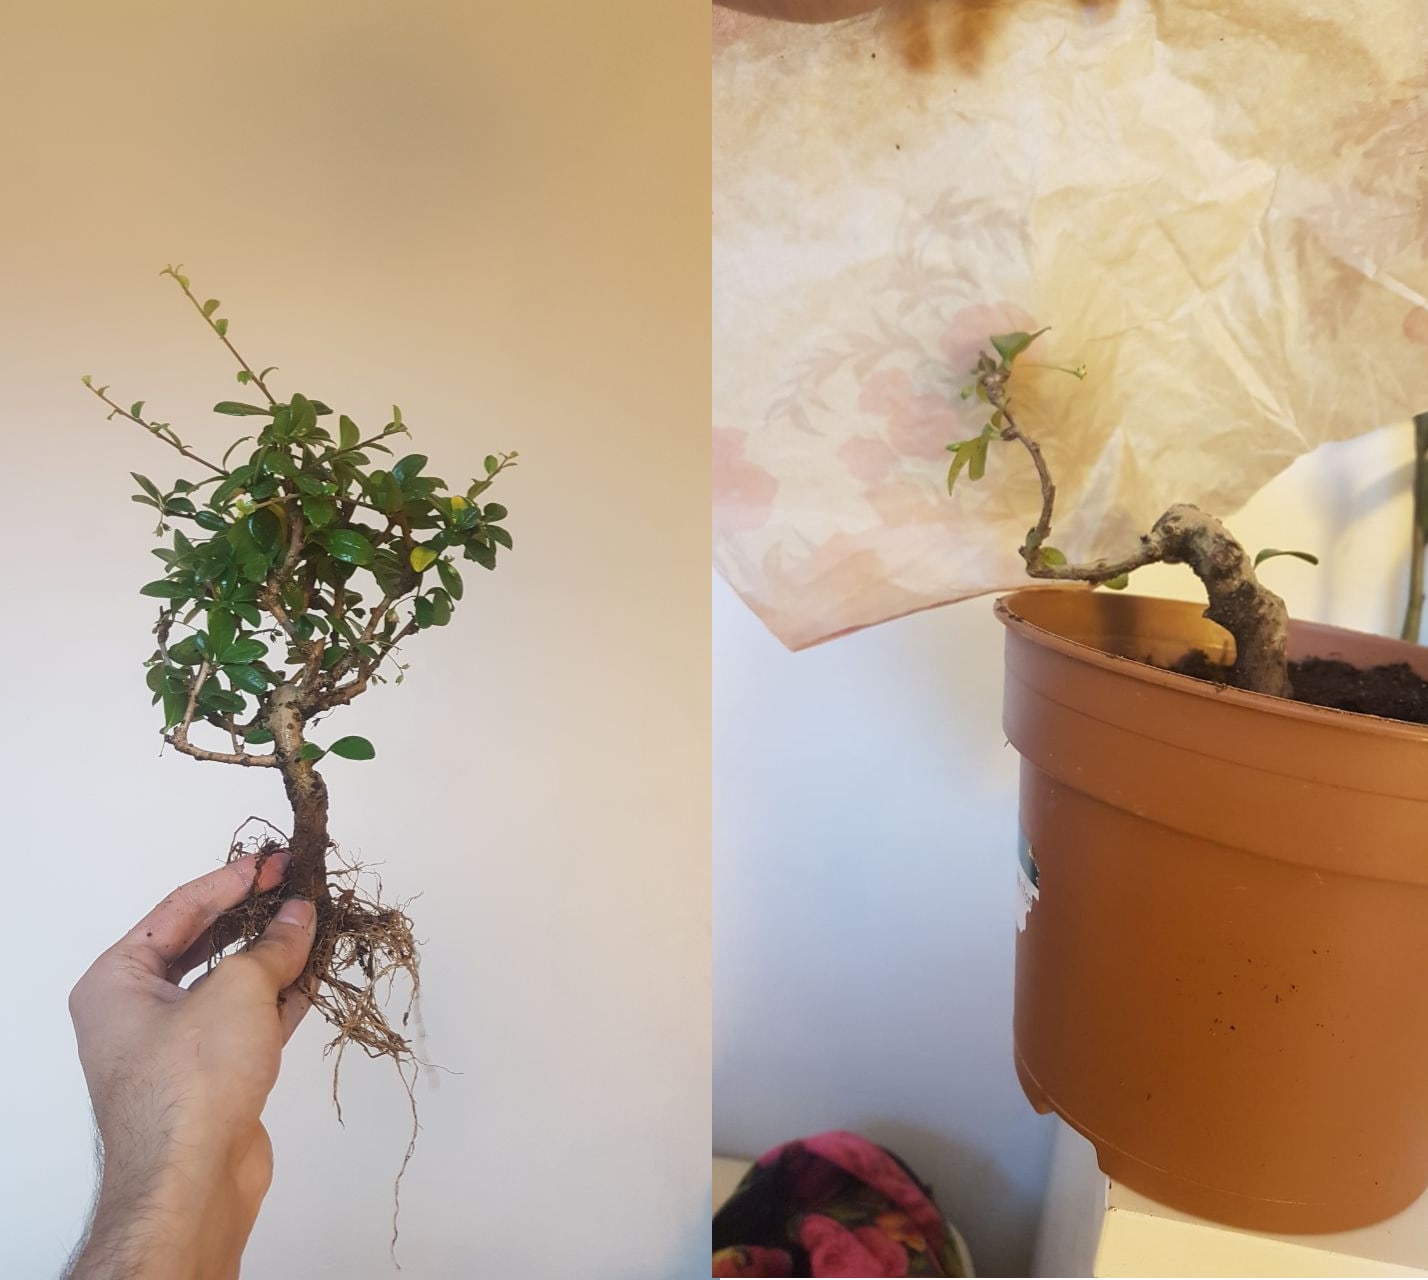 Fukien tea mutilation and my plans for its future. Need aesthetic advice